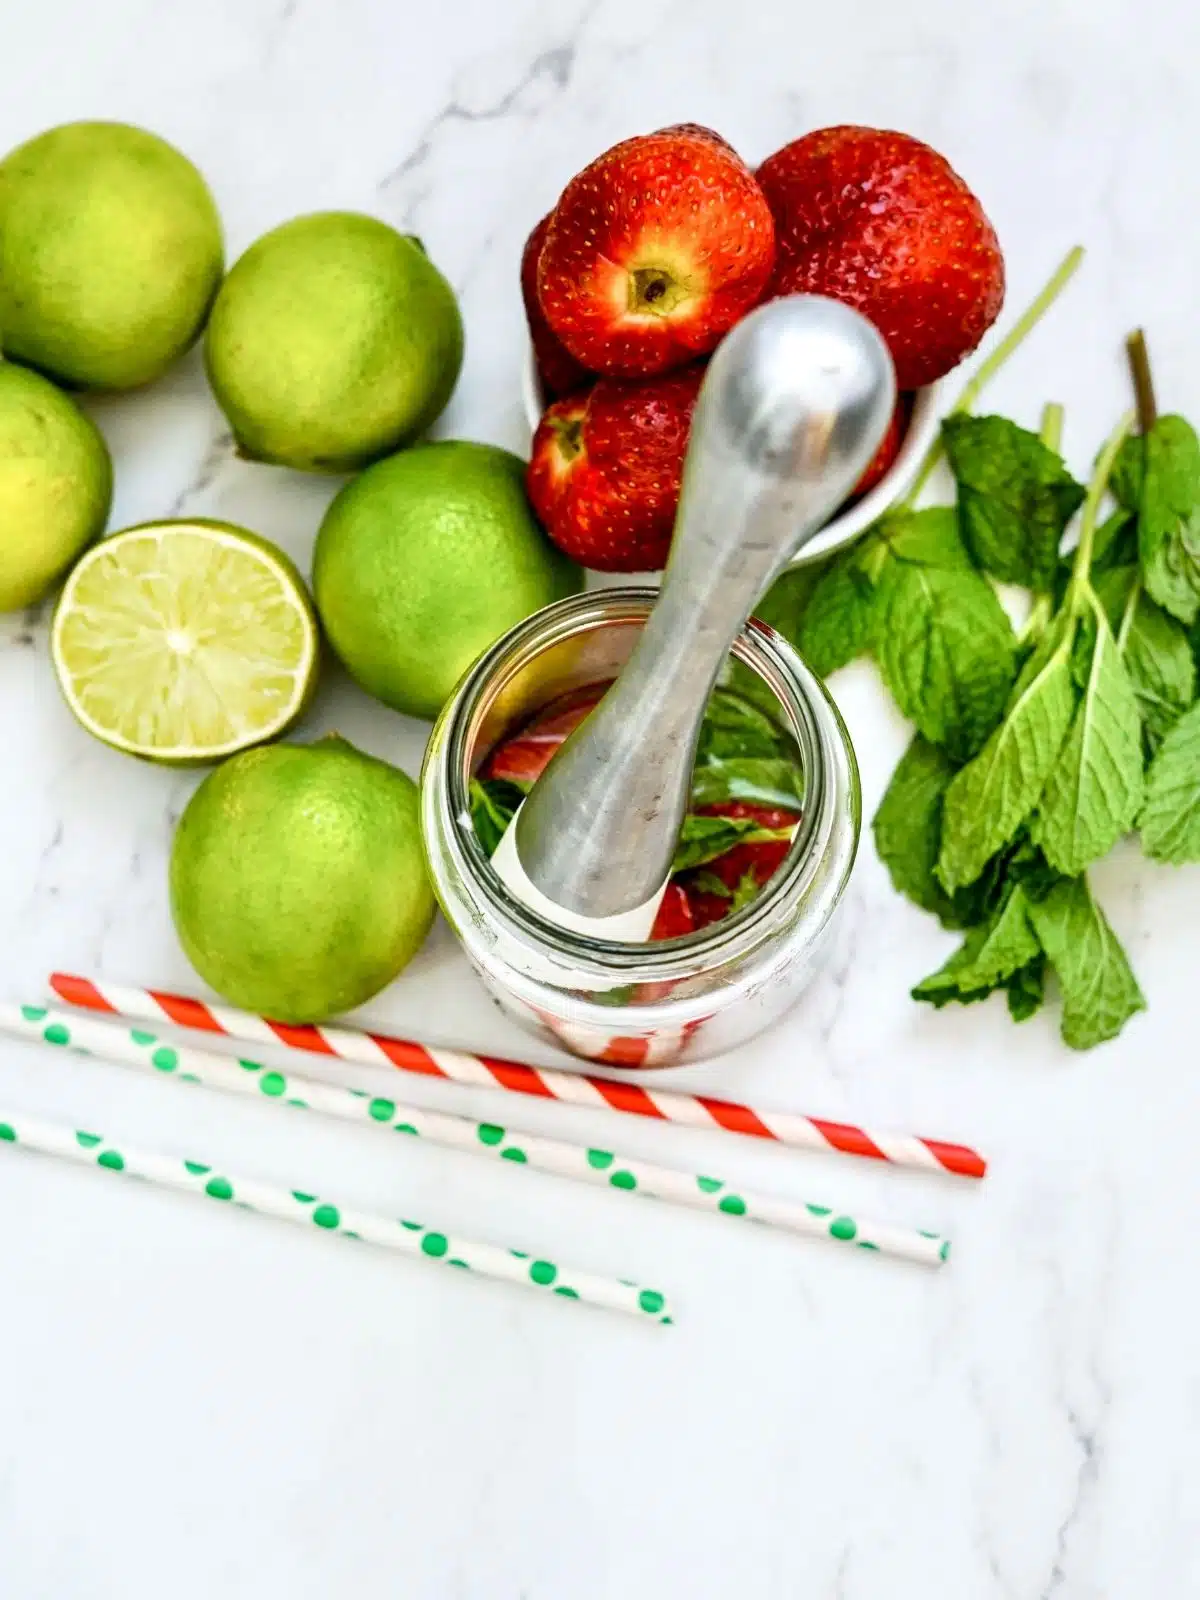 Add lime juice in glass with strawberries and mint.